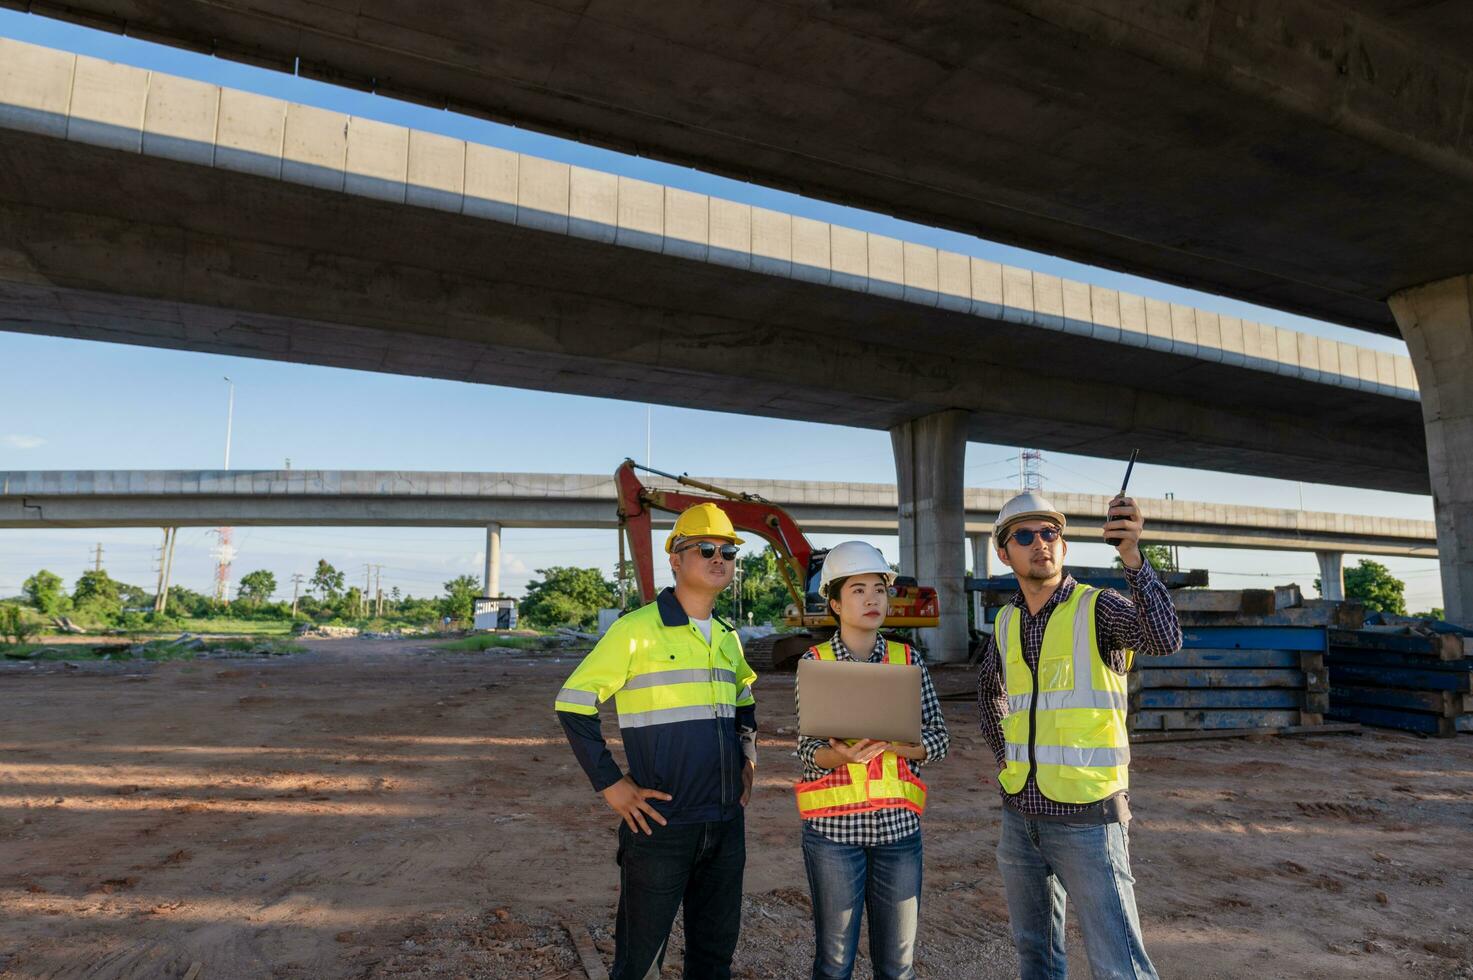 construction site Workers and engineers of various nationalities are discussing plans. Two construction workers working together while visiting expressway construction photo